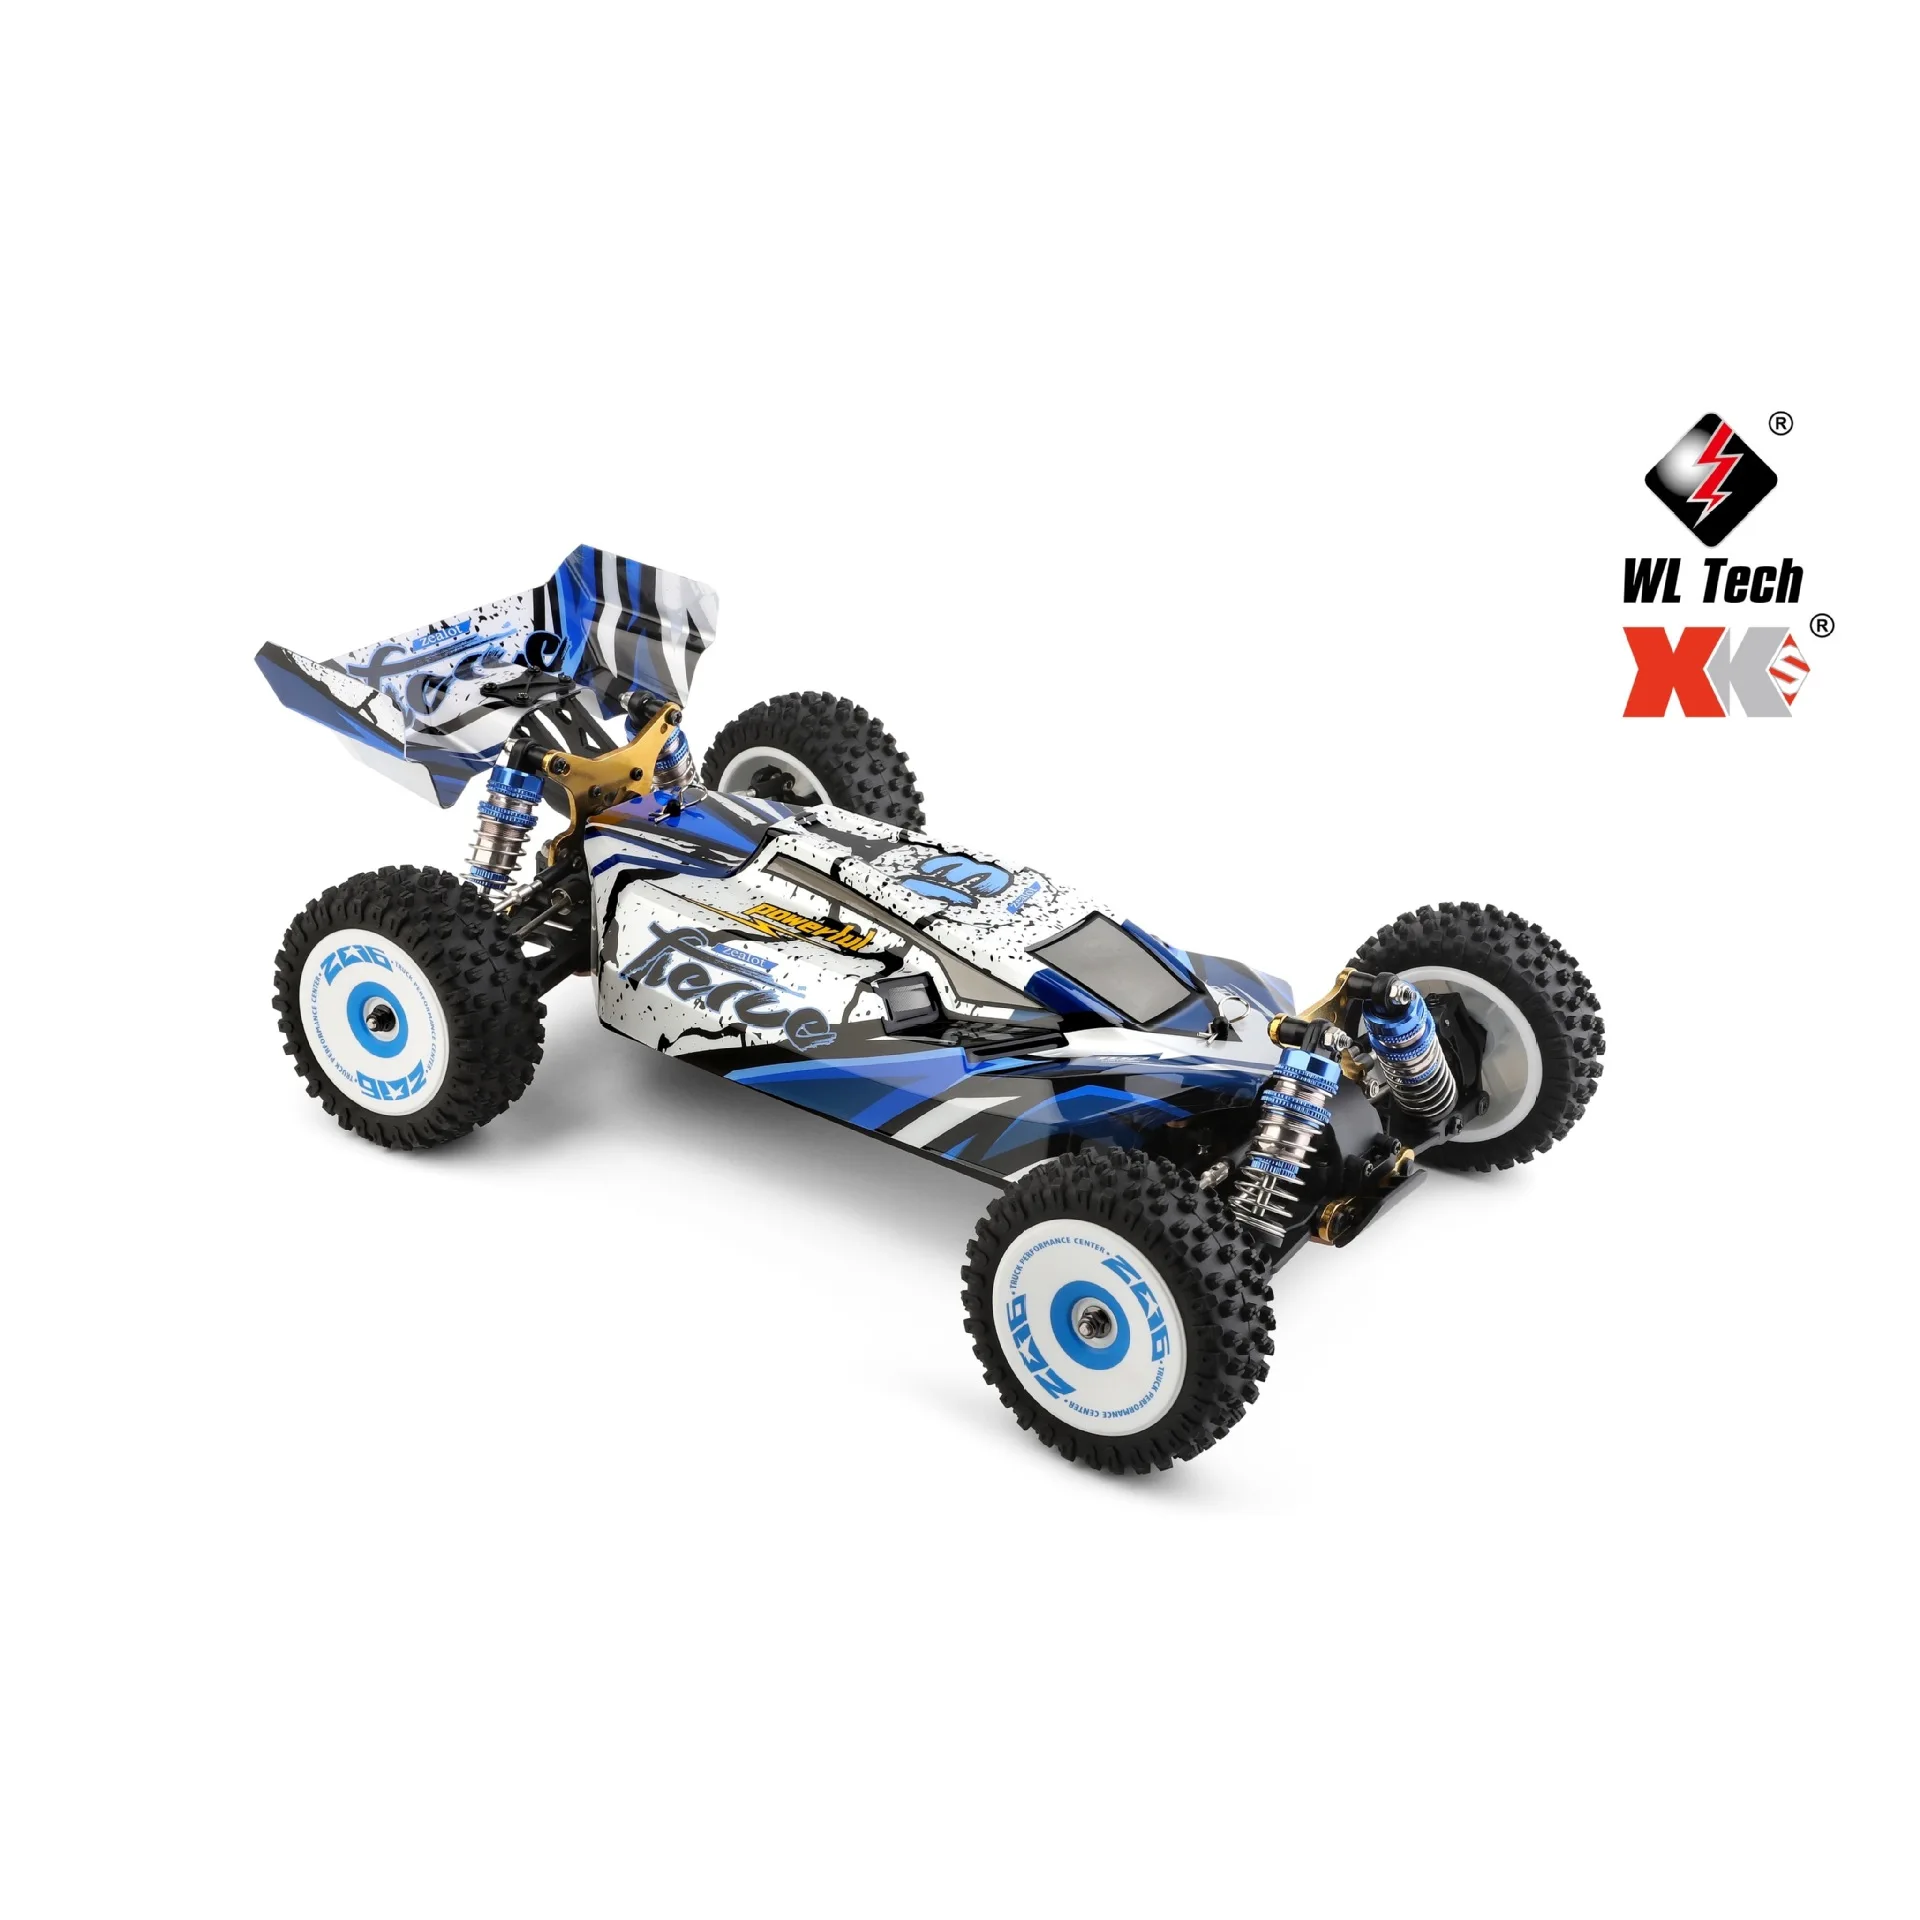 

124017 rc car Wltoys 124019 Upgraded Version RTR 1/12 2.4G 4WD Brushless Motor 75Km/H High Speed Remote Control Off-road Drift